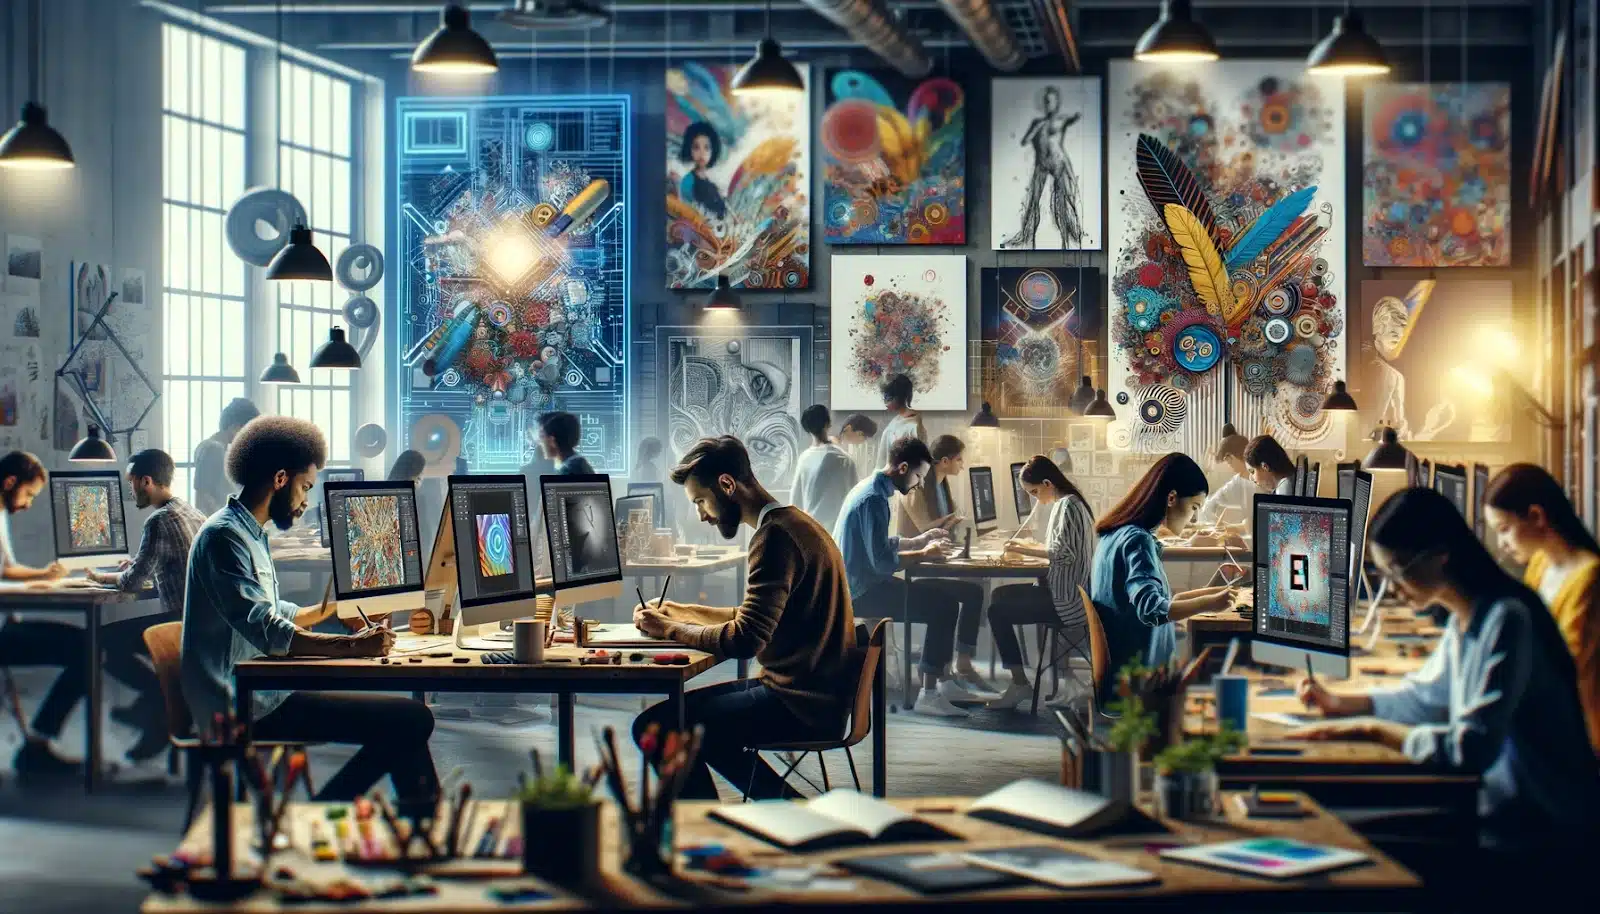 Artists and designers immersed in a creative workshop, utilizing Adobe AI on tablets and computers, surrounded by vibrant digital art and sket